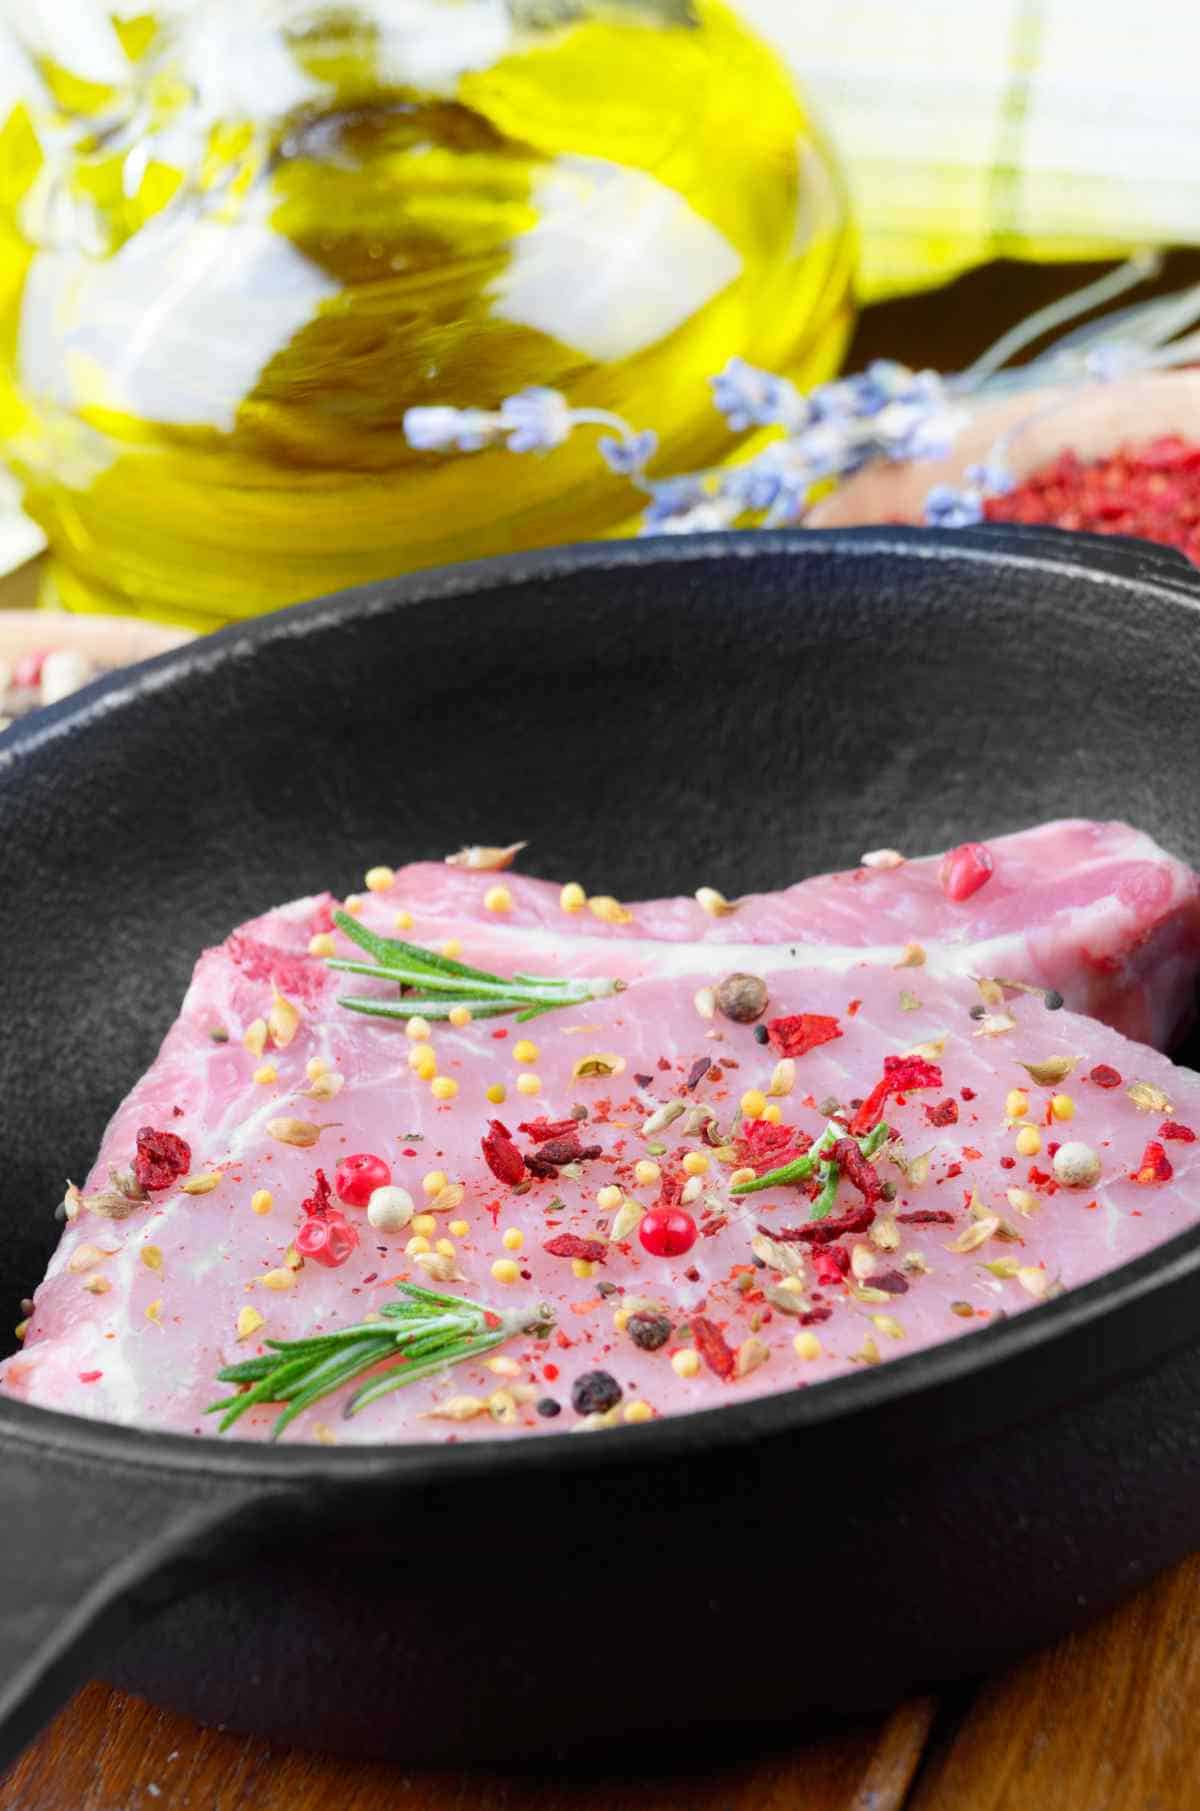 Raw pork rib chops on frying pan with rosemary, pepper garlic and spices.